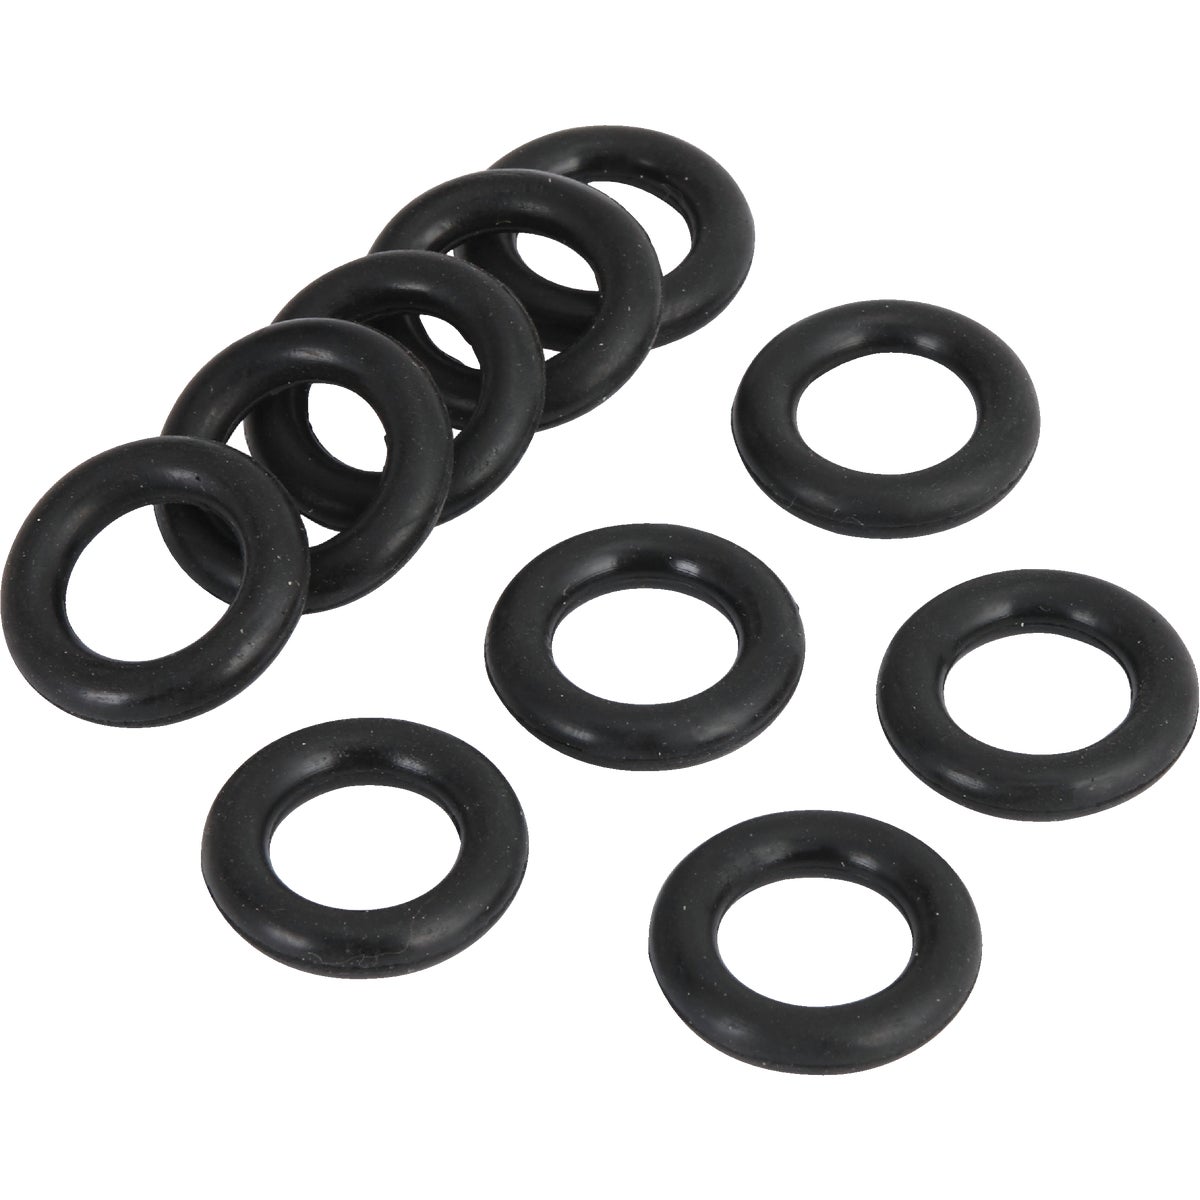 Item 731080, Rubber O-ring for hoses and hose connectors